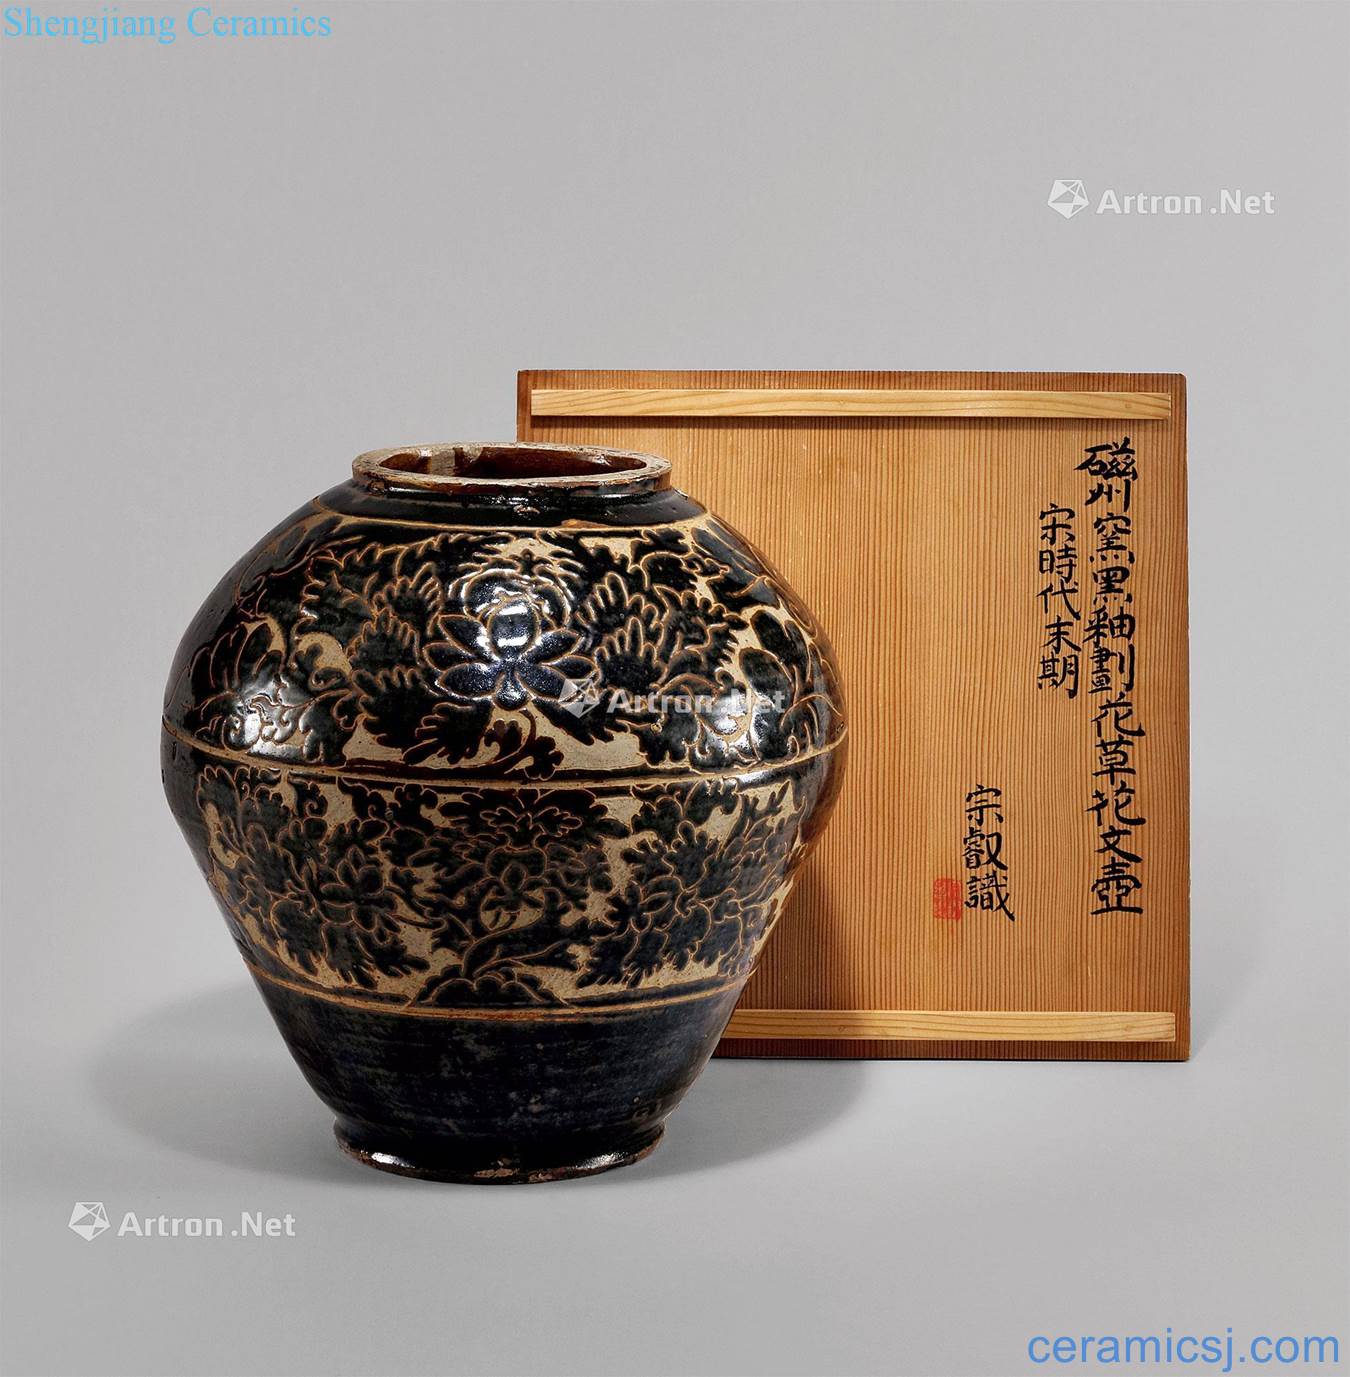 Song magnetic state kiln carved peony grains pot